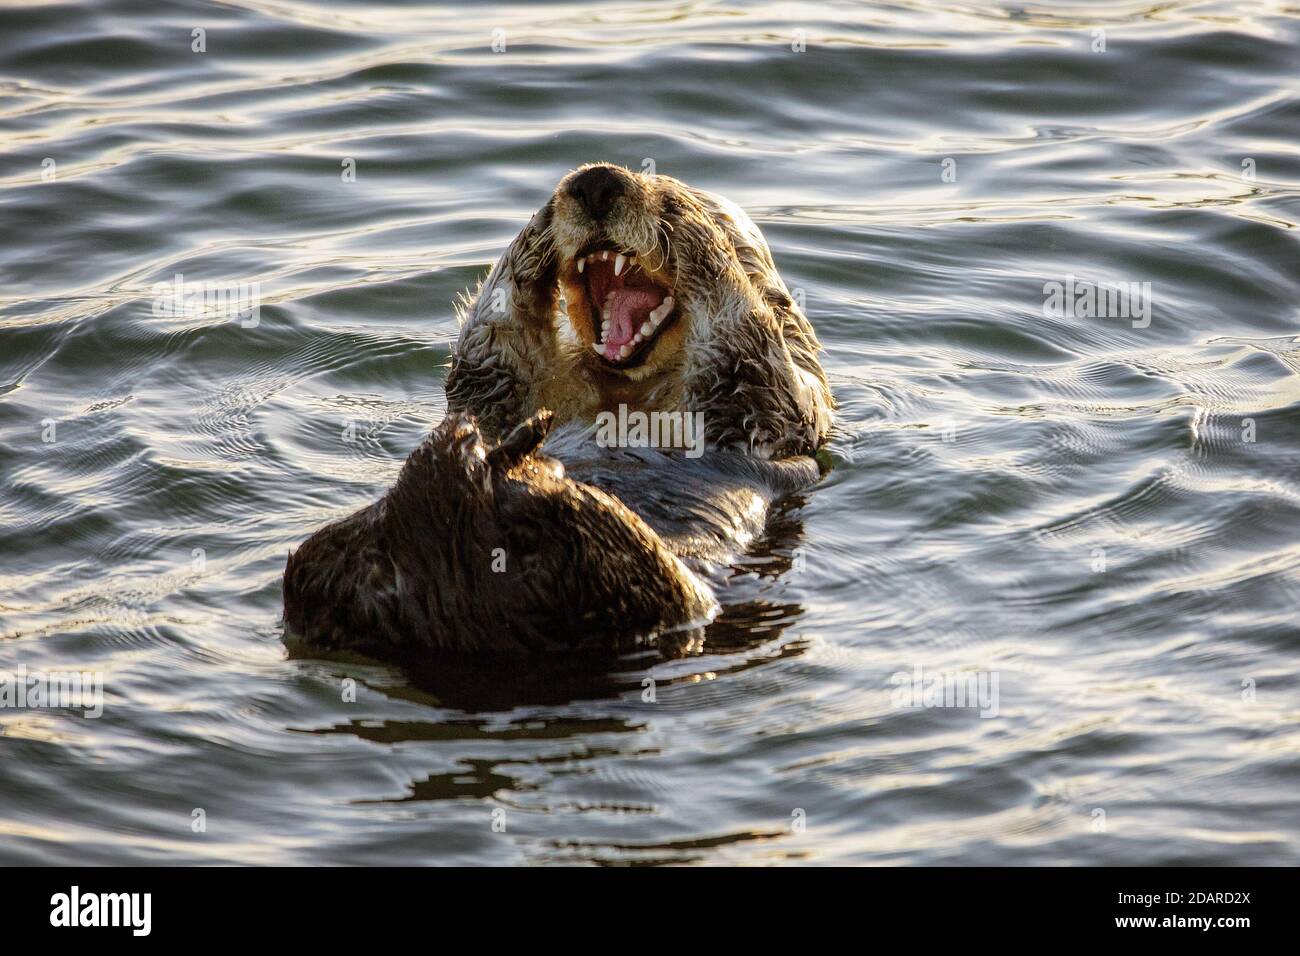 A Sea Otter (Enhydra lutris) appears to be laughing in the Elkhorn Slough, Moss Landing, California Stock Photo